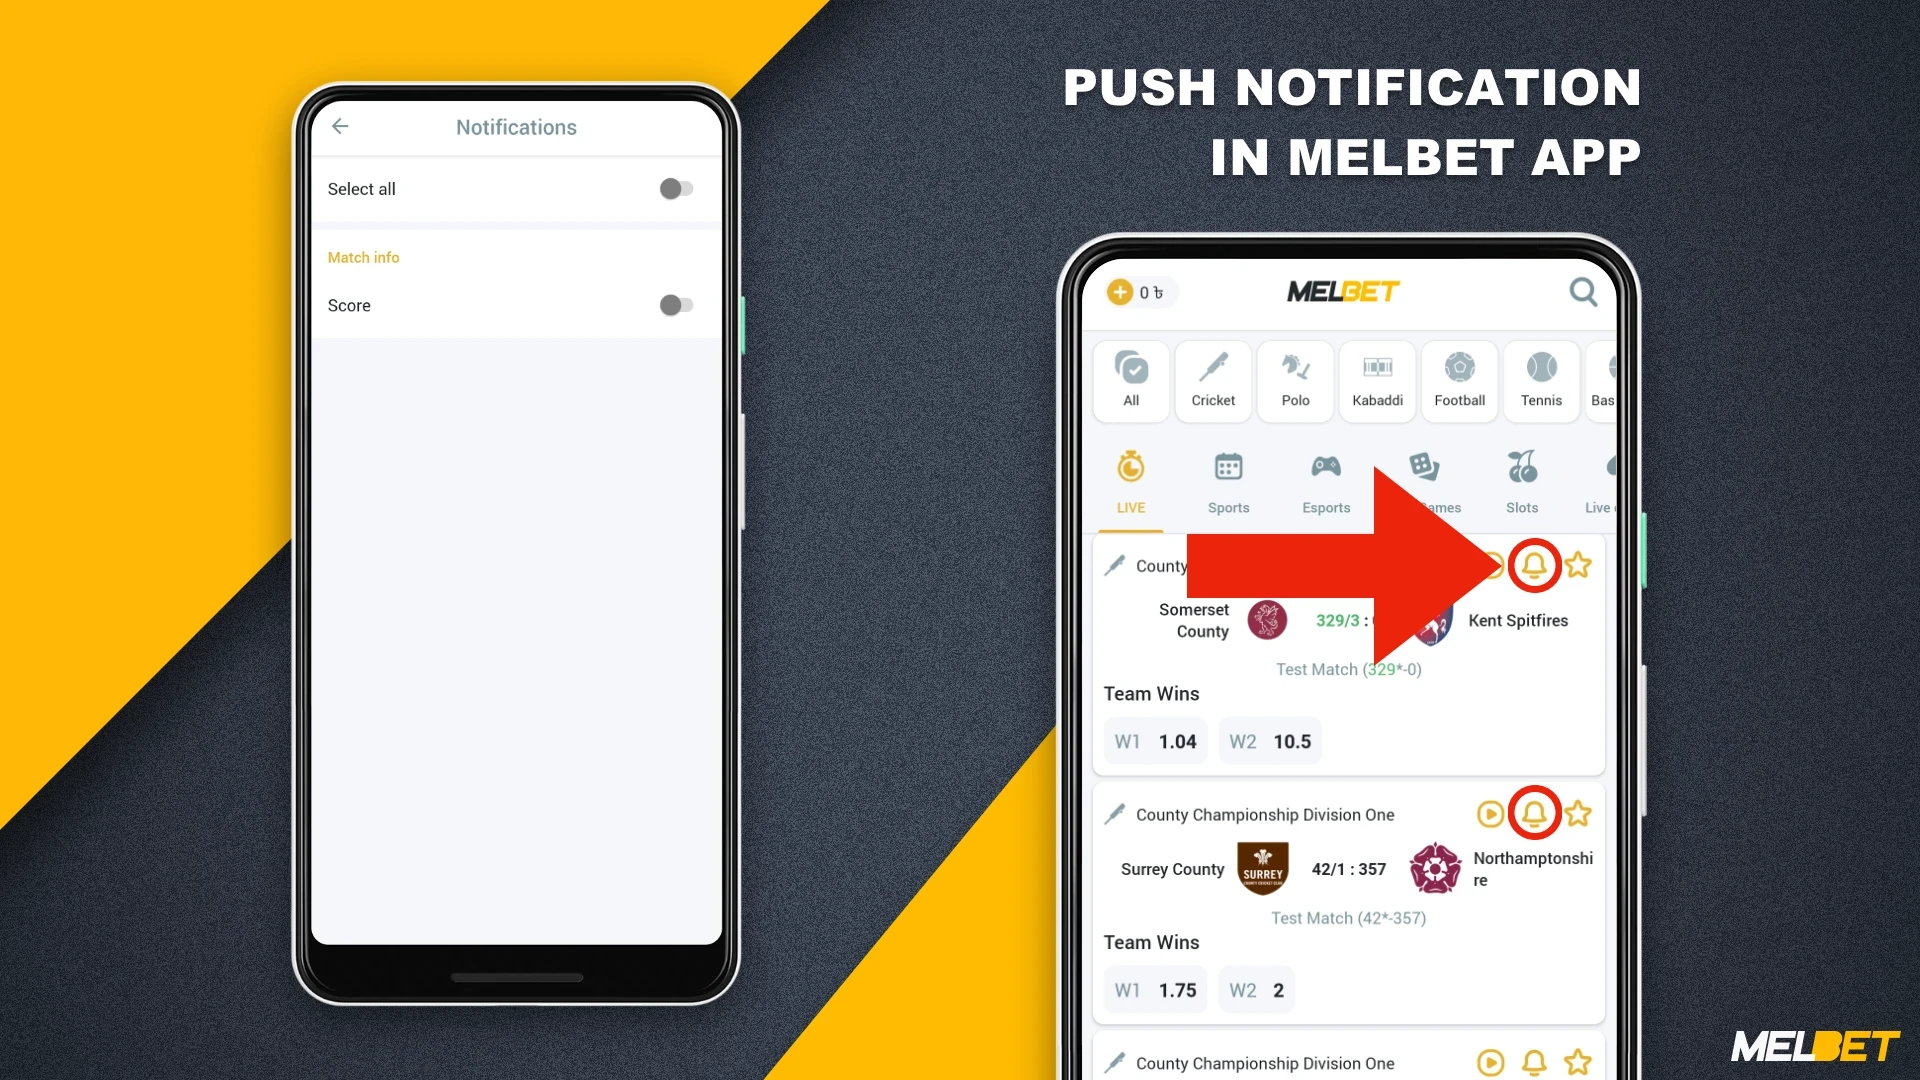 In order not to miss an important event, the Melbet app provides push notifications